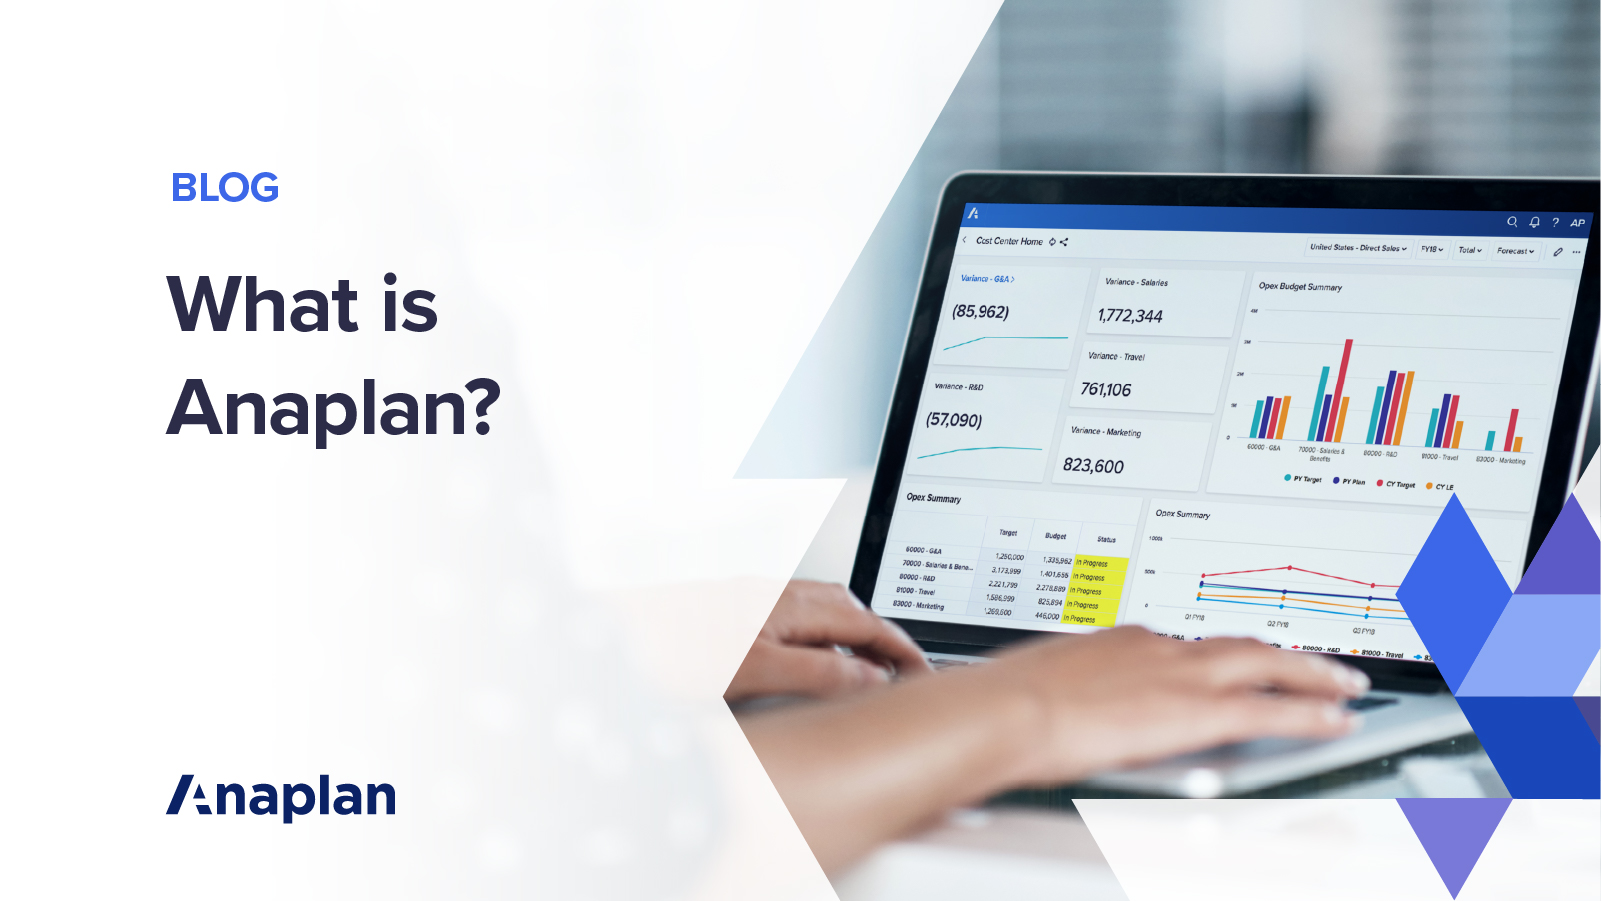 What is Anaplan? And how does it exemplify Connected Planning? Anaplan